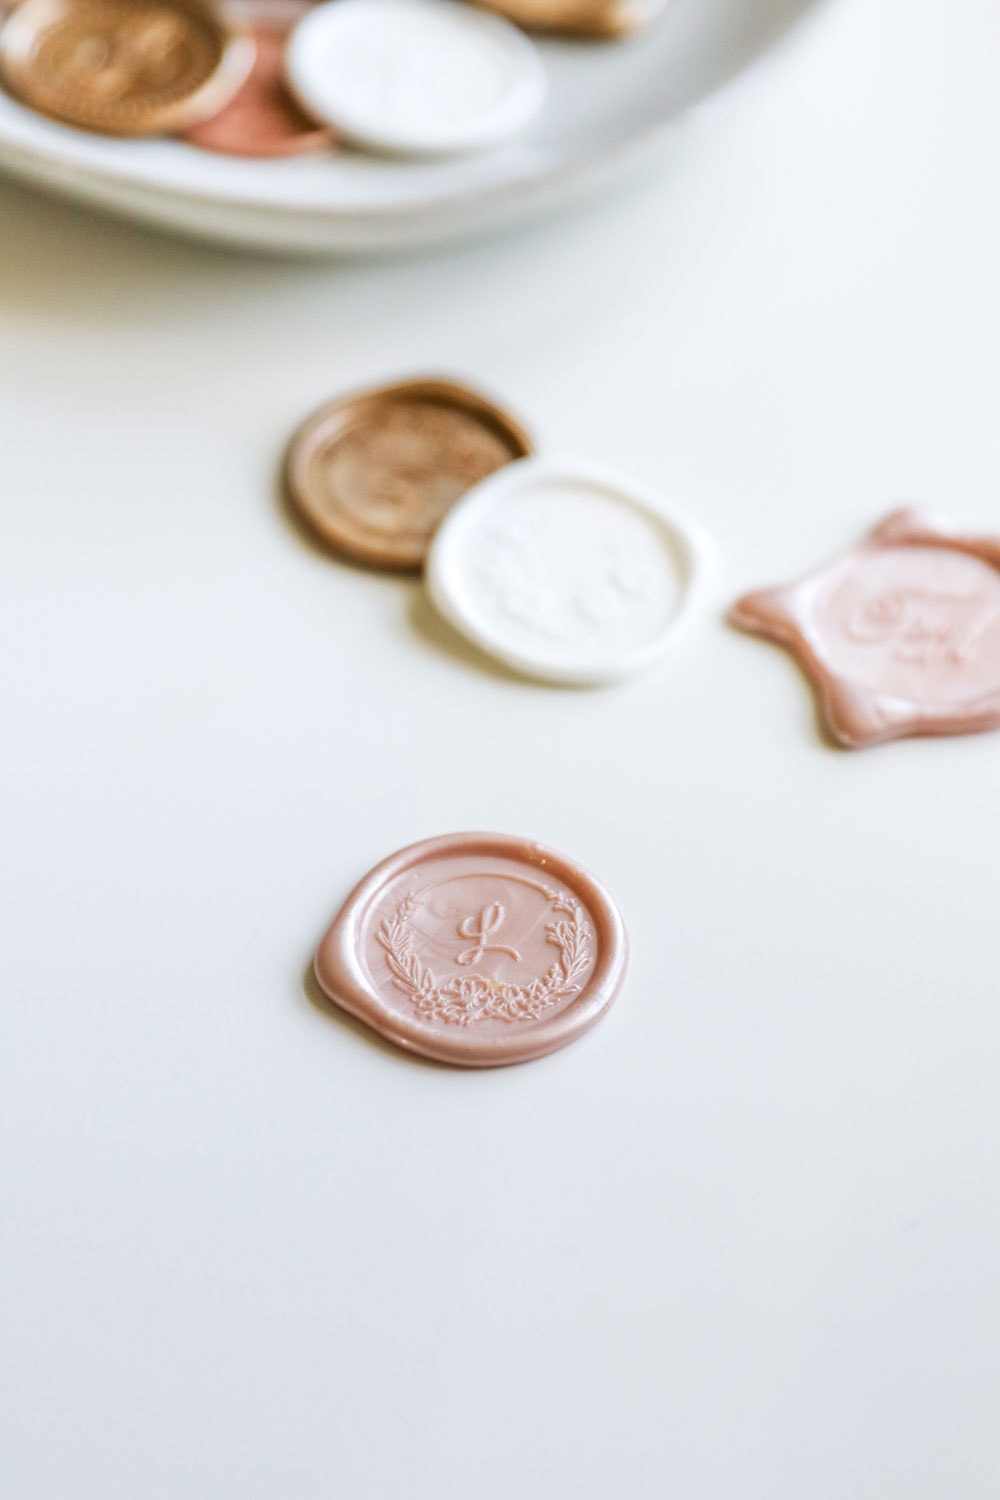 Can I use a candle for wax seals? and 10 other wax seal questions